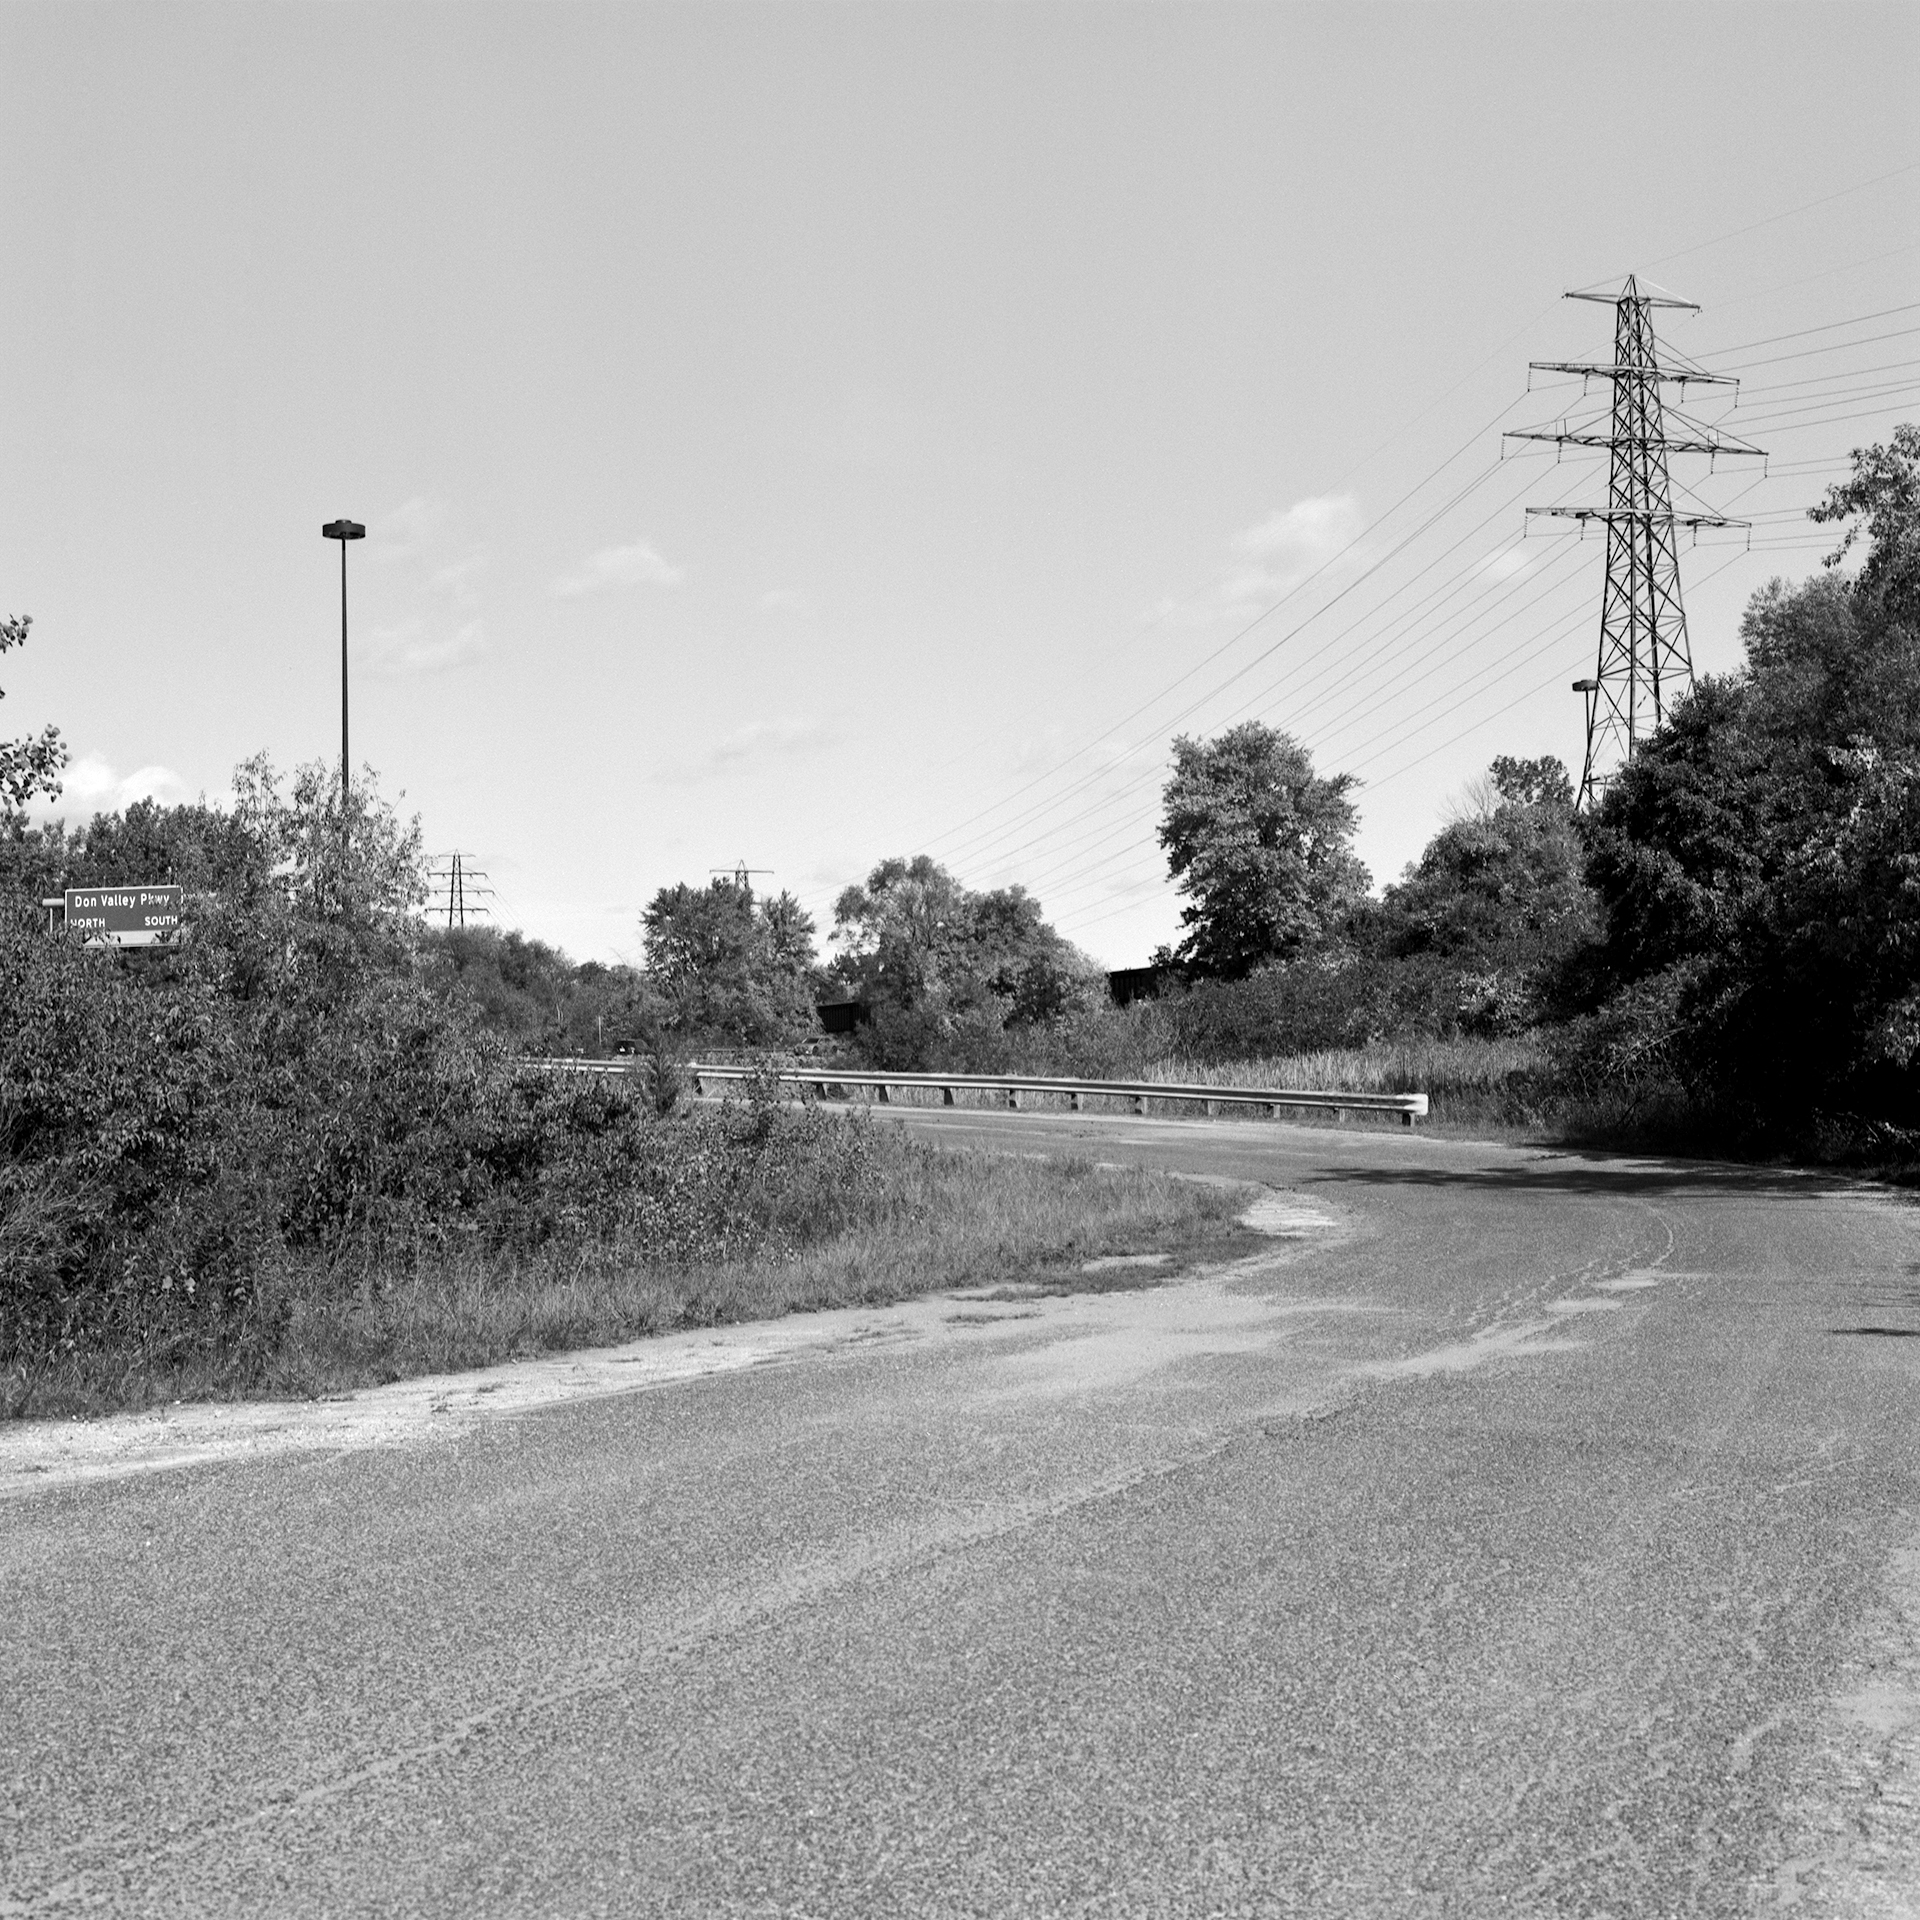 Where The River Runs # 5: A square black and white photograph of a decommissioned roadway. The road extends from the bottom, leading into a guard rail positioned in the middle of the frame. A sign that reads 'Don Valley Pkwy' can be seen through the trees on the left side of the image as electric towers and power lines come from the right.